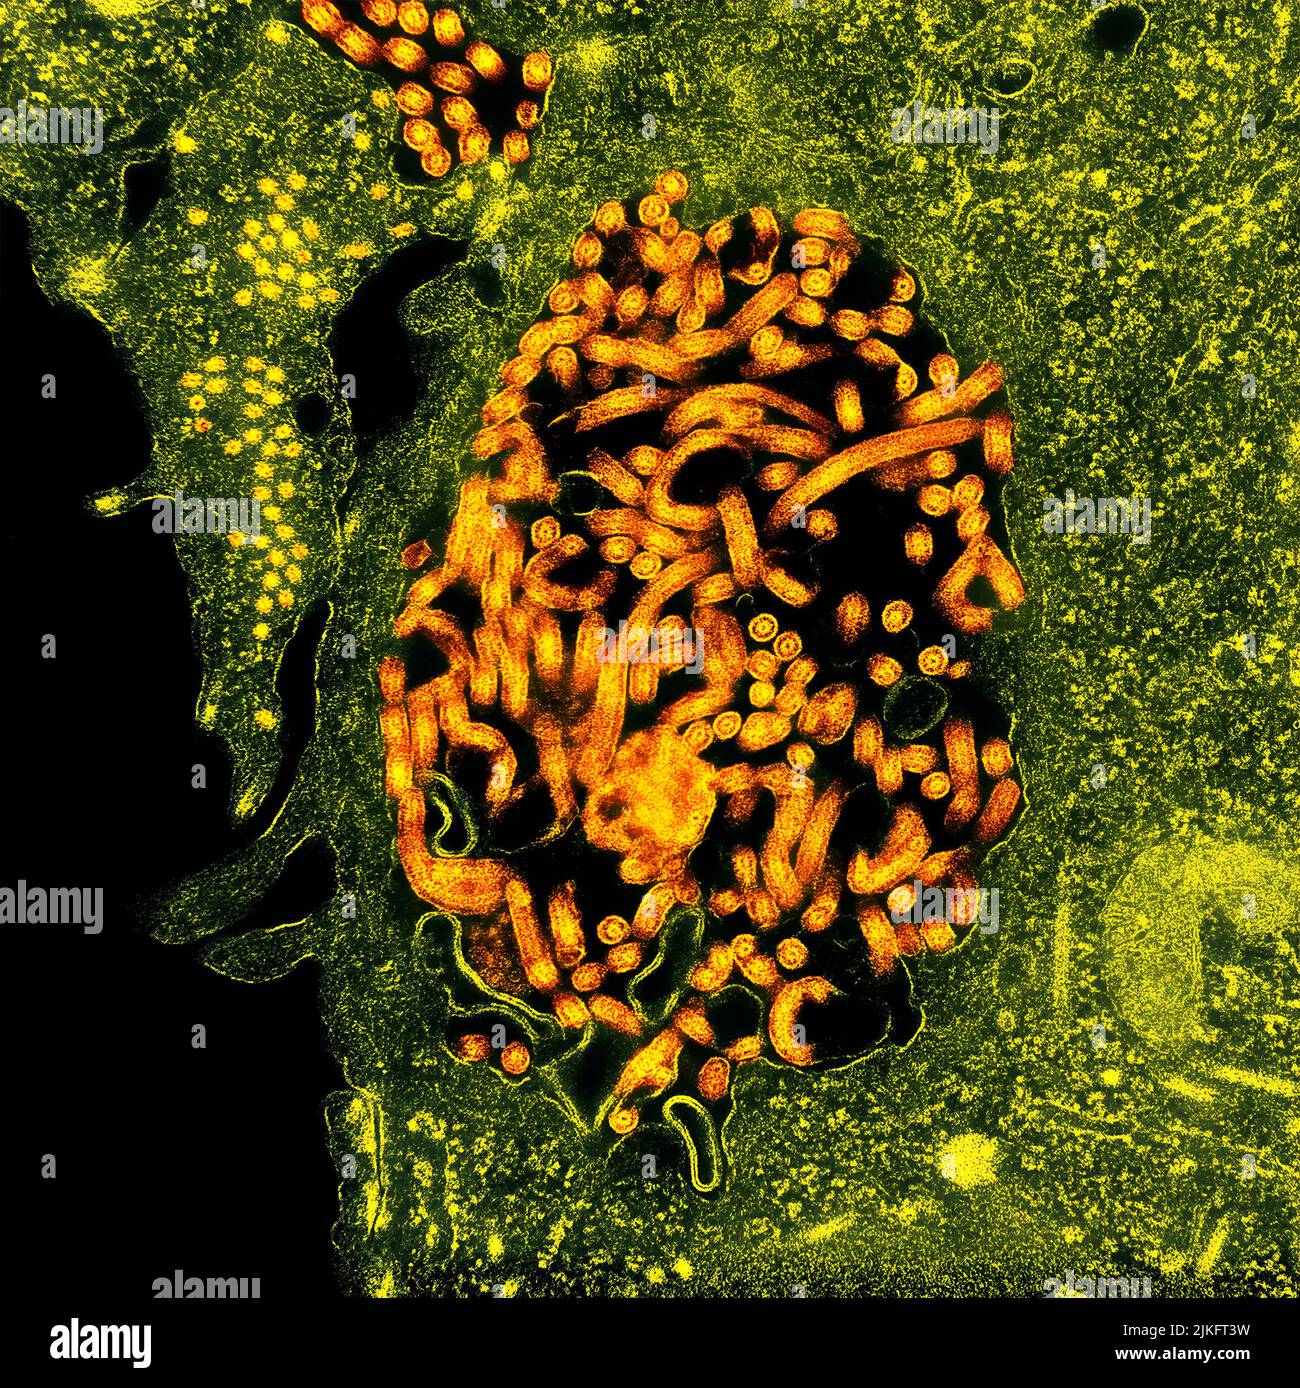 Transmission electron micrograph of Ebola virus nucleocapsids (small orange circles) and virus particles (larger orange filamentous shapes) in infected African green monkey kidney cells. Focused image at the NIAID Integrated Research Center in Fort Detrick, Maryland. Stock Photo